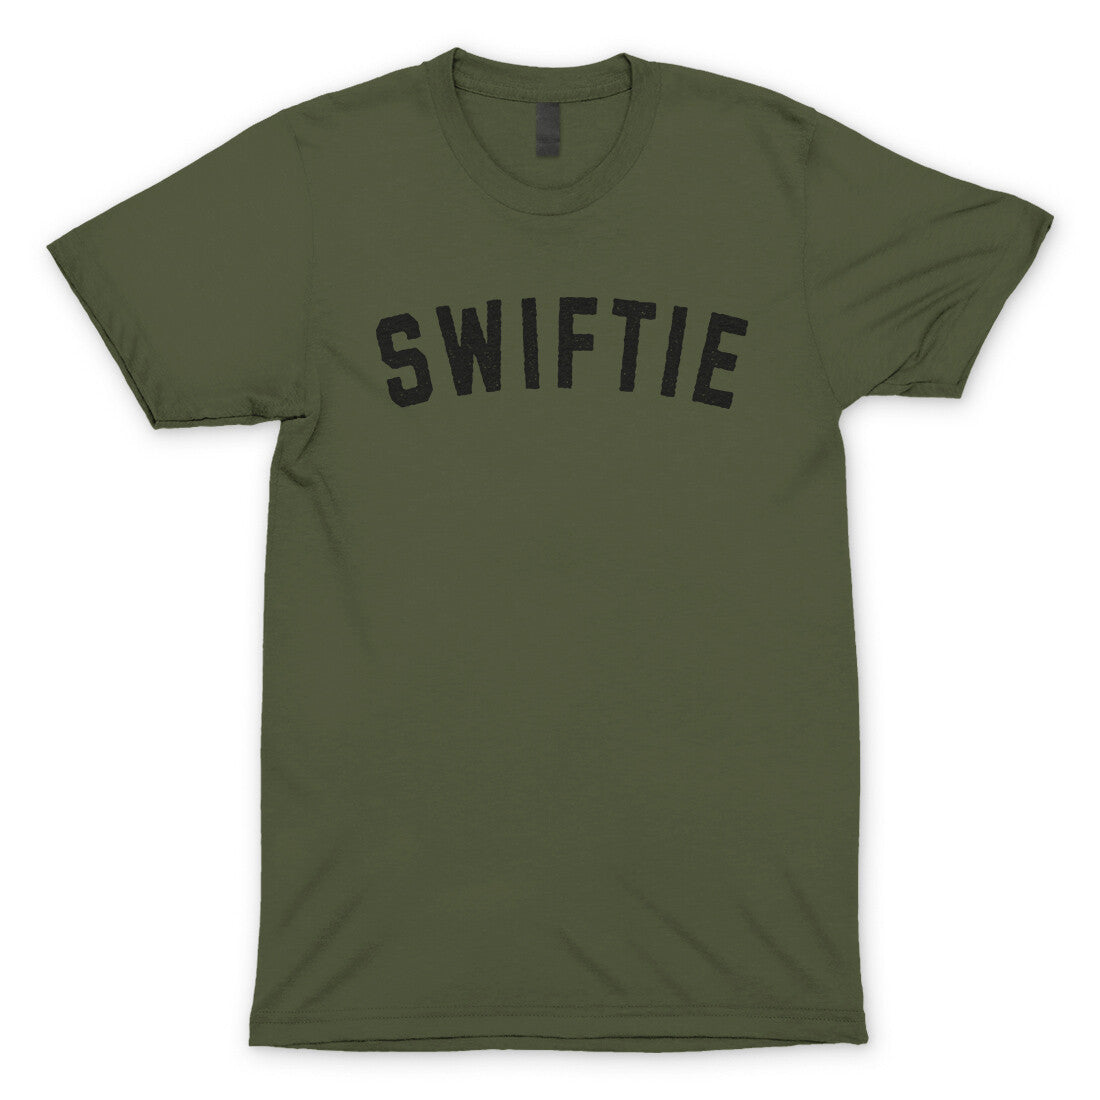 Swiftie in Military Green Color